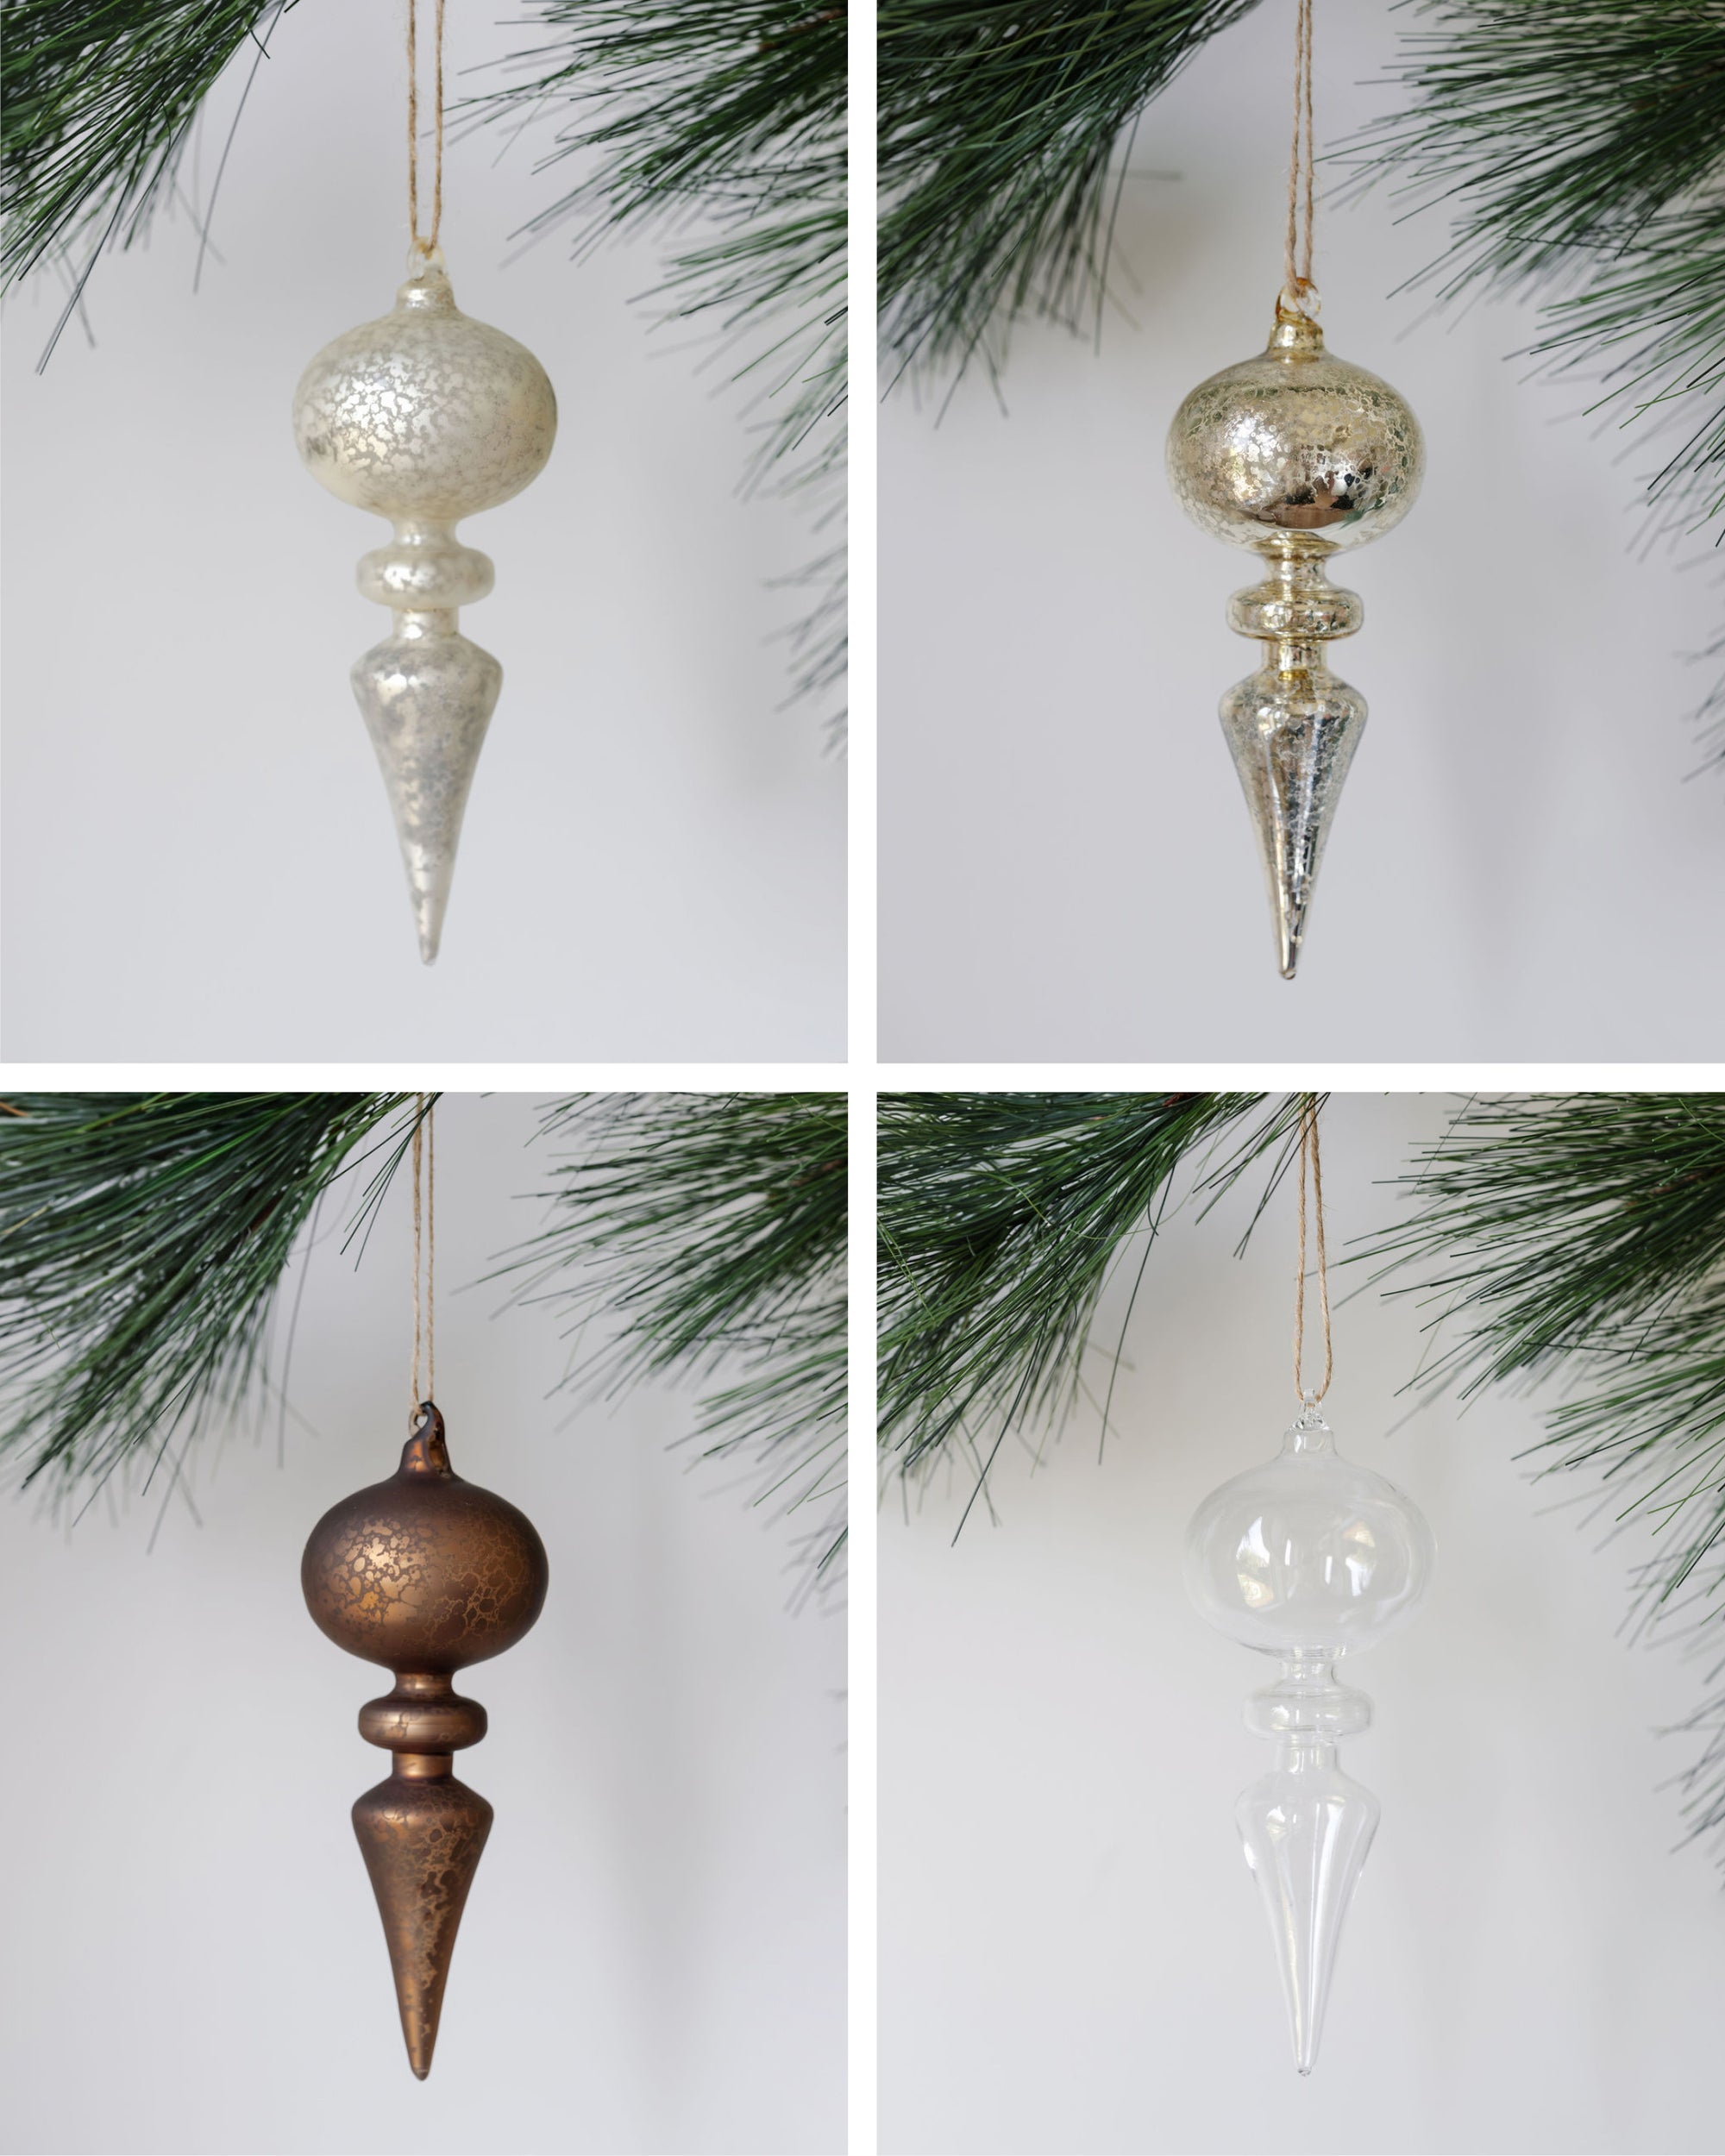 all 4 styles of Finial Glass Neutral